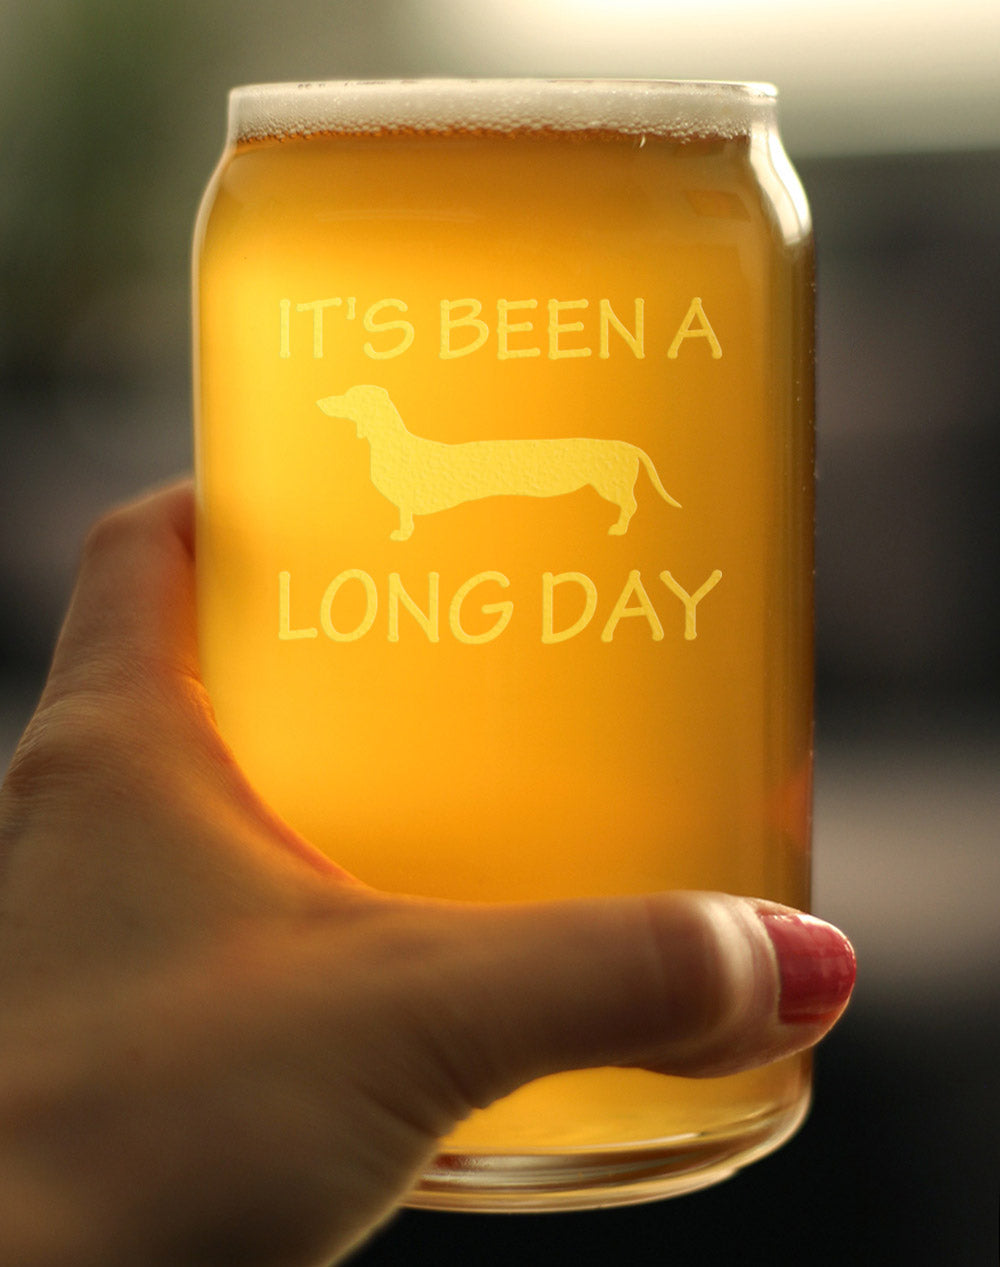 Long Day - Funny Beer Can Pint Glass - Unique Dachshund Gifts for Men &amp; Women - Fun Dachshunds Themed Decor